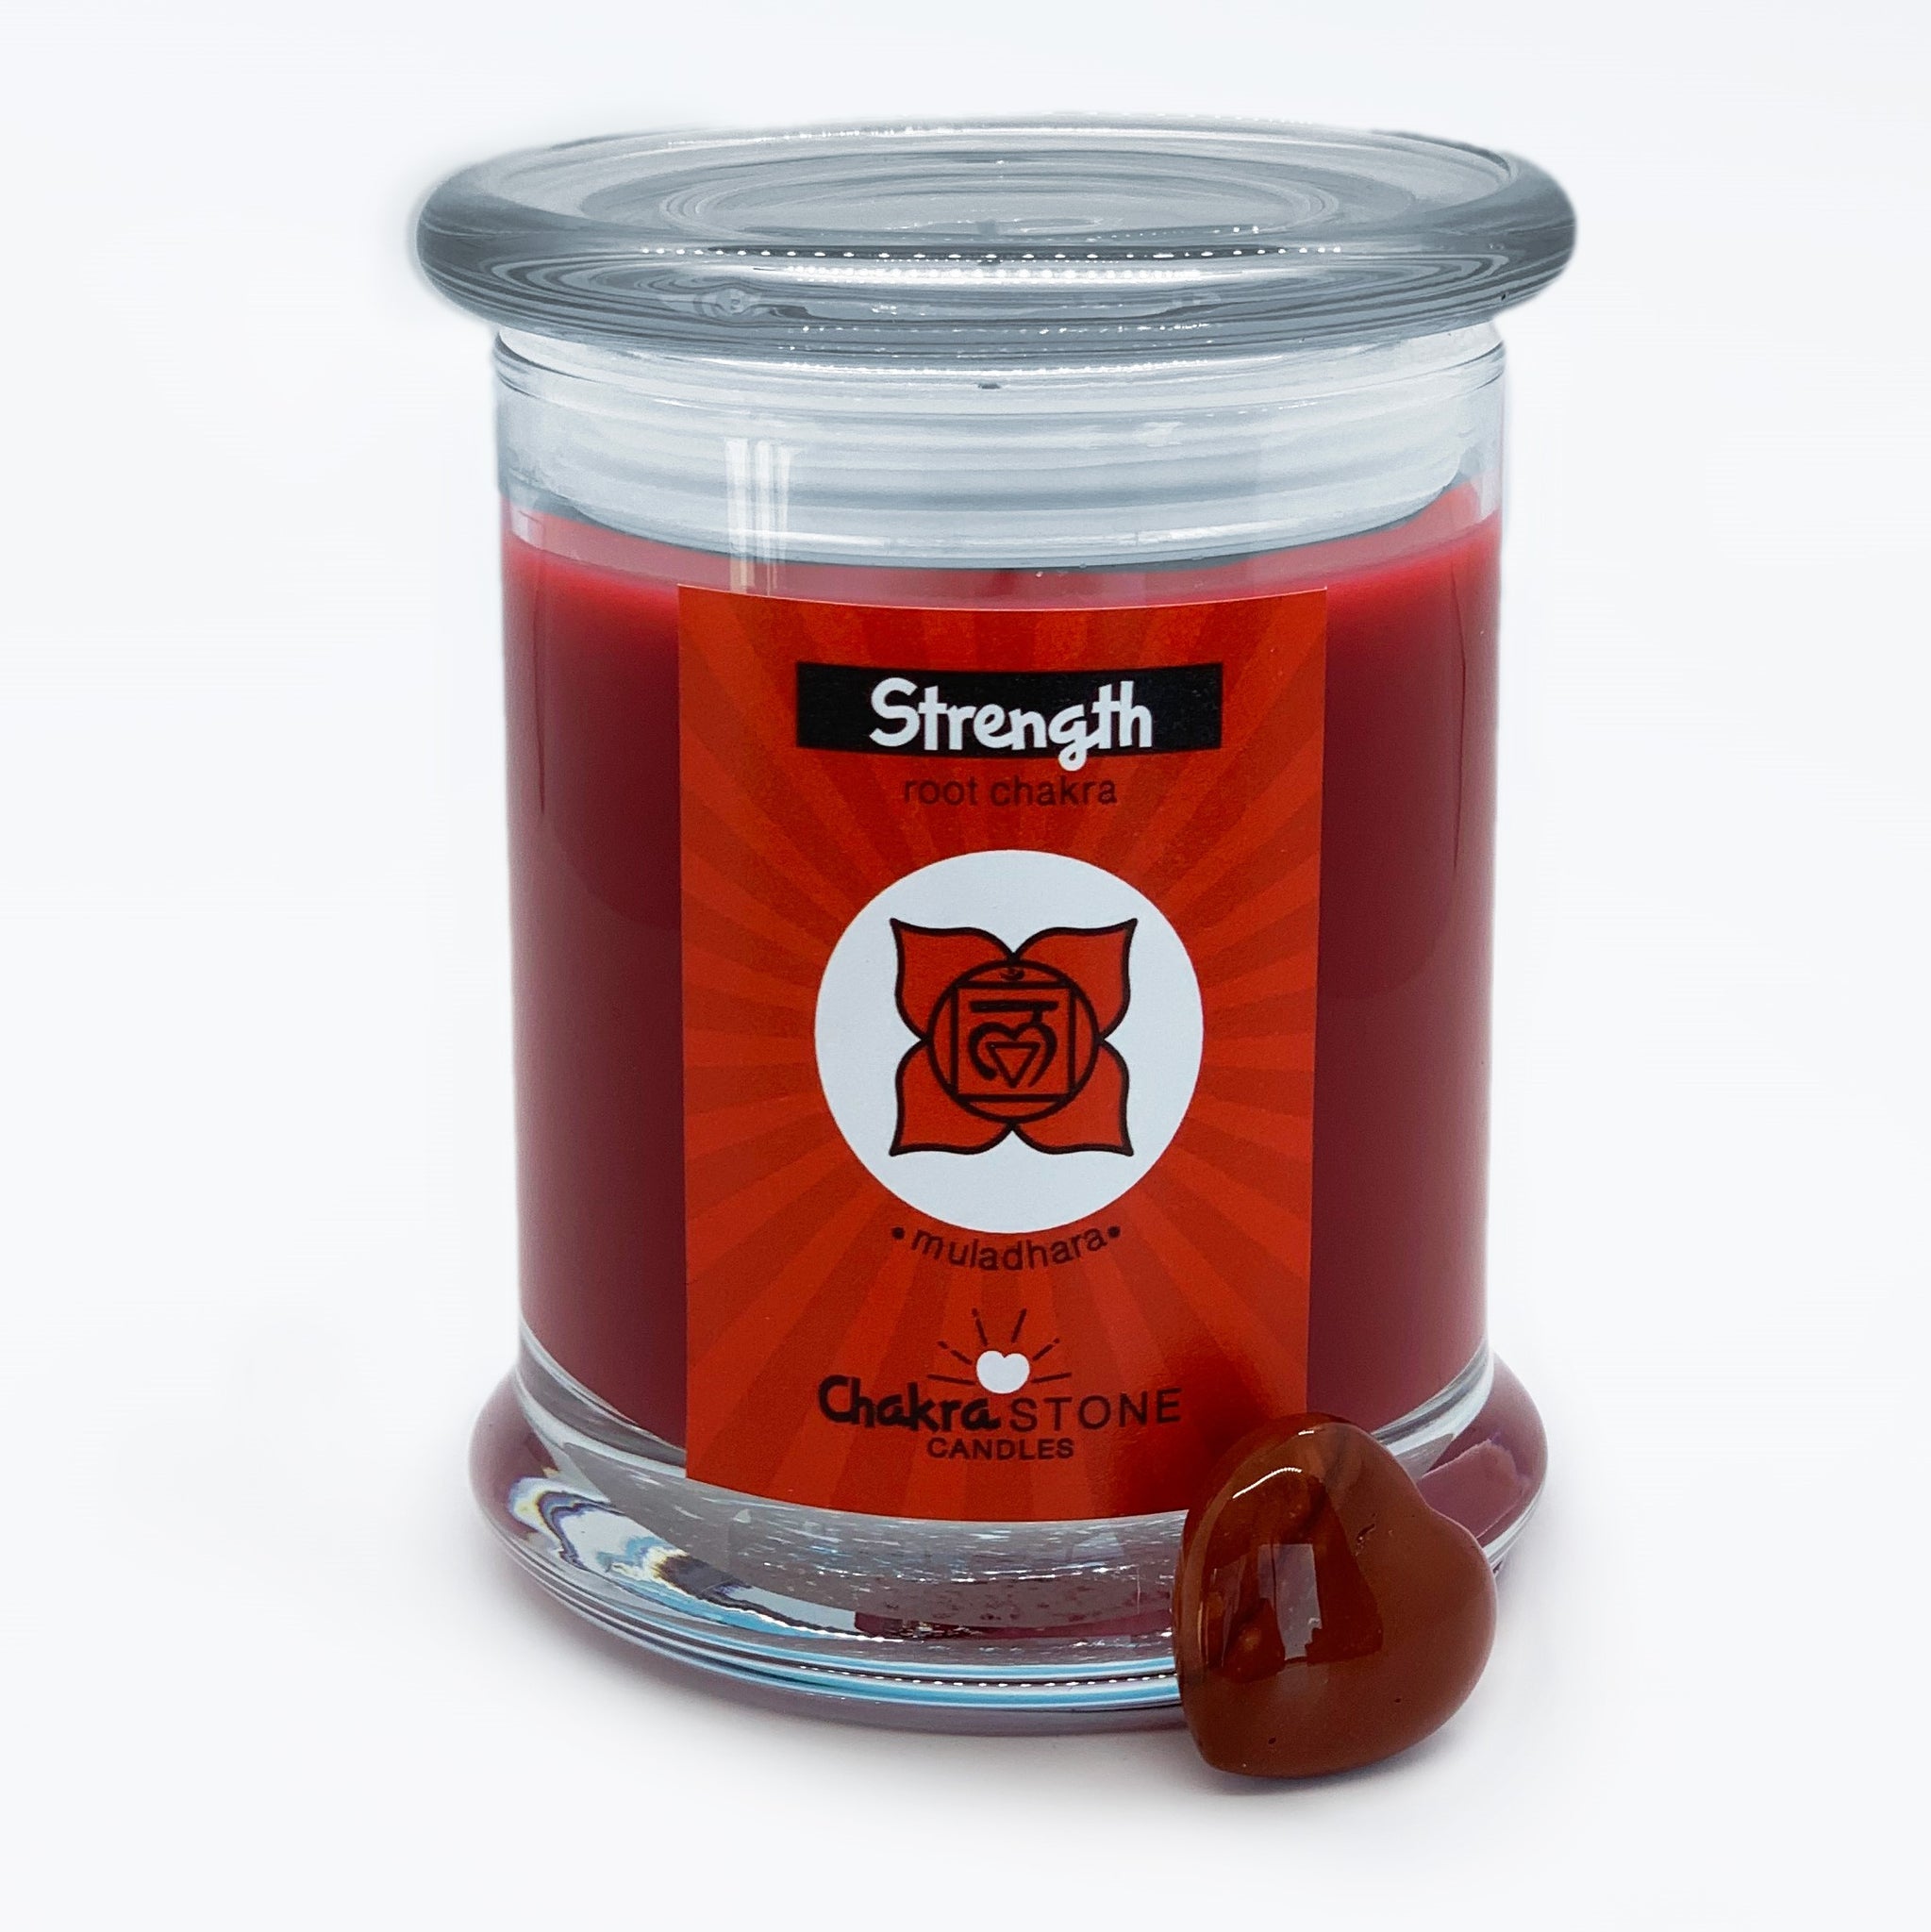 Strength - Root Chakra Candle